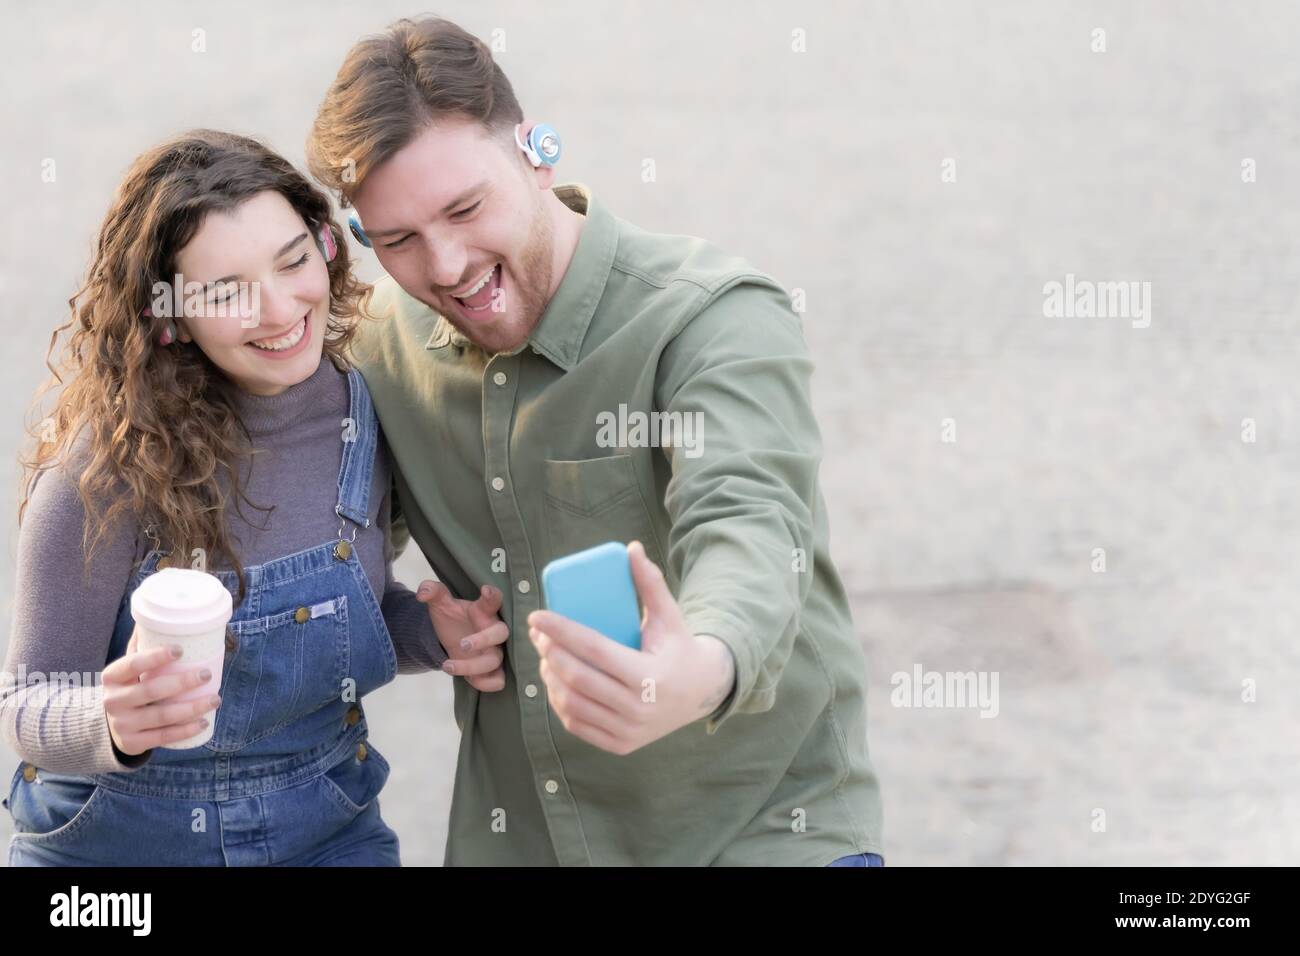 Happy couple listening music and making a selfie. Millennial friends drinking a good smoothie and using new technology. Stock Photo